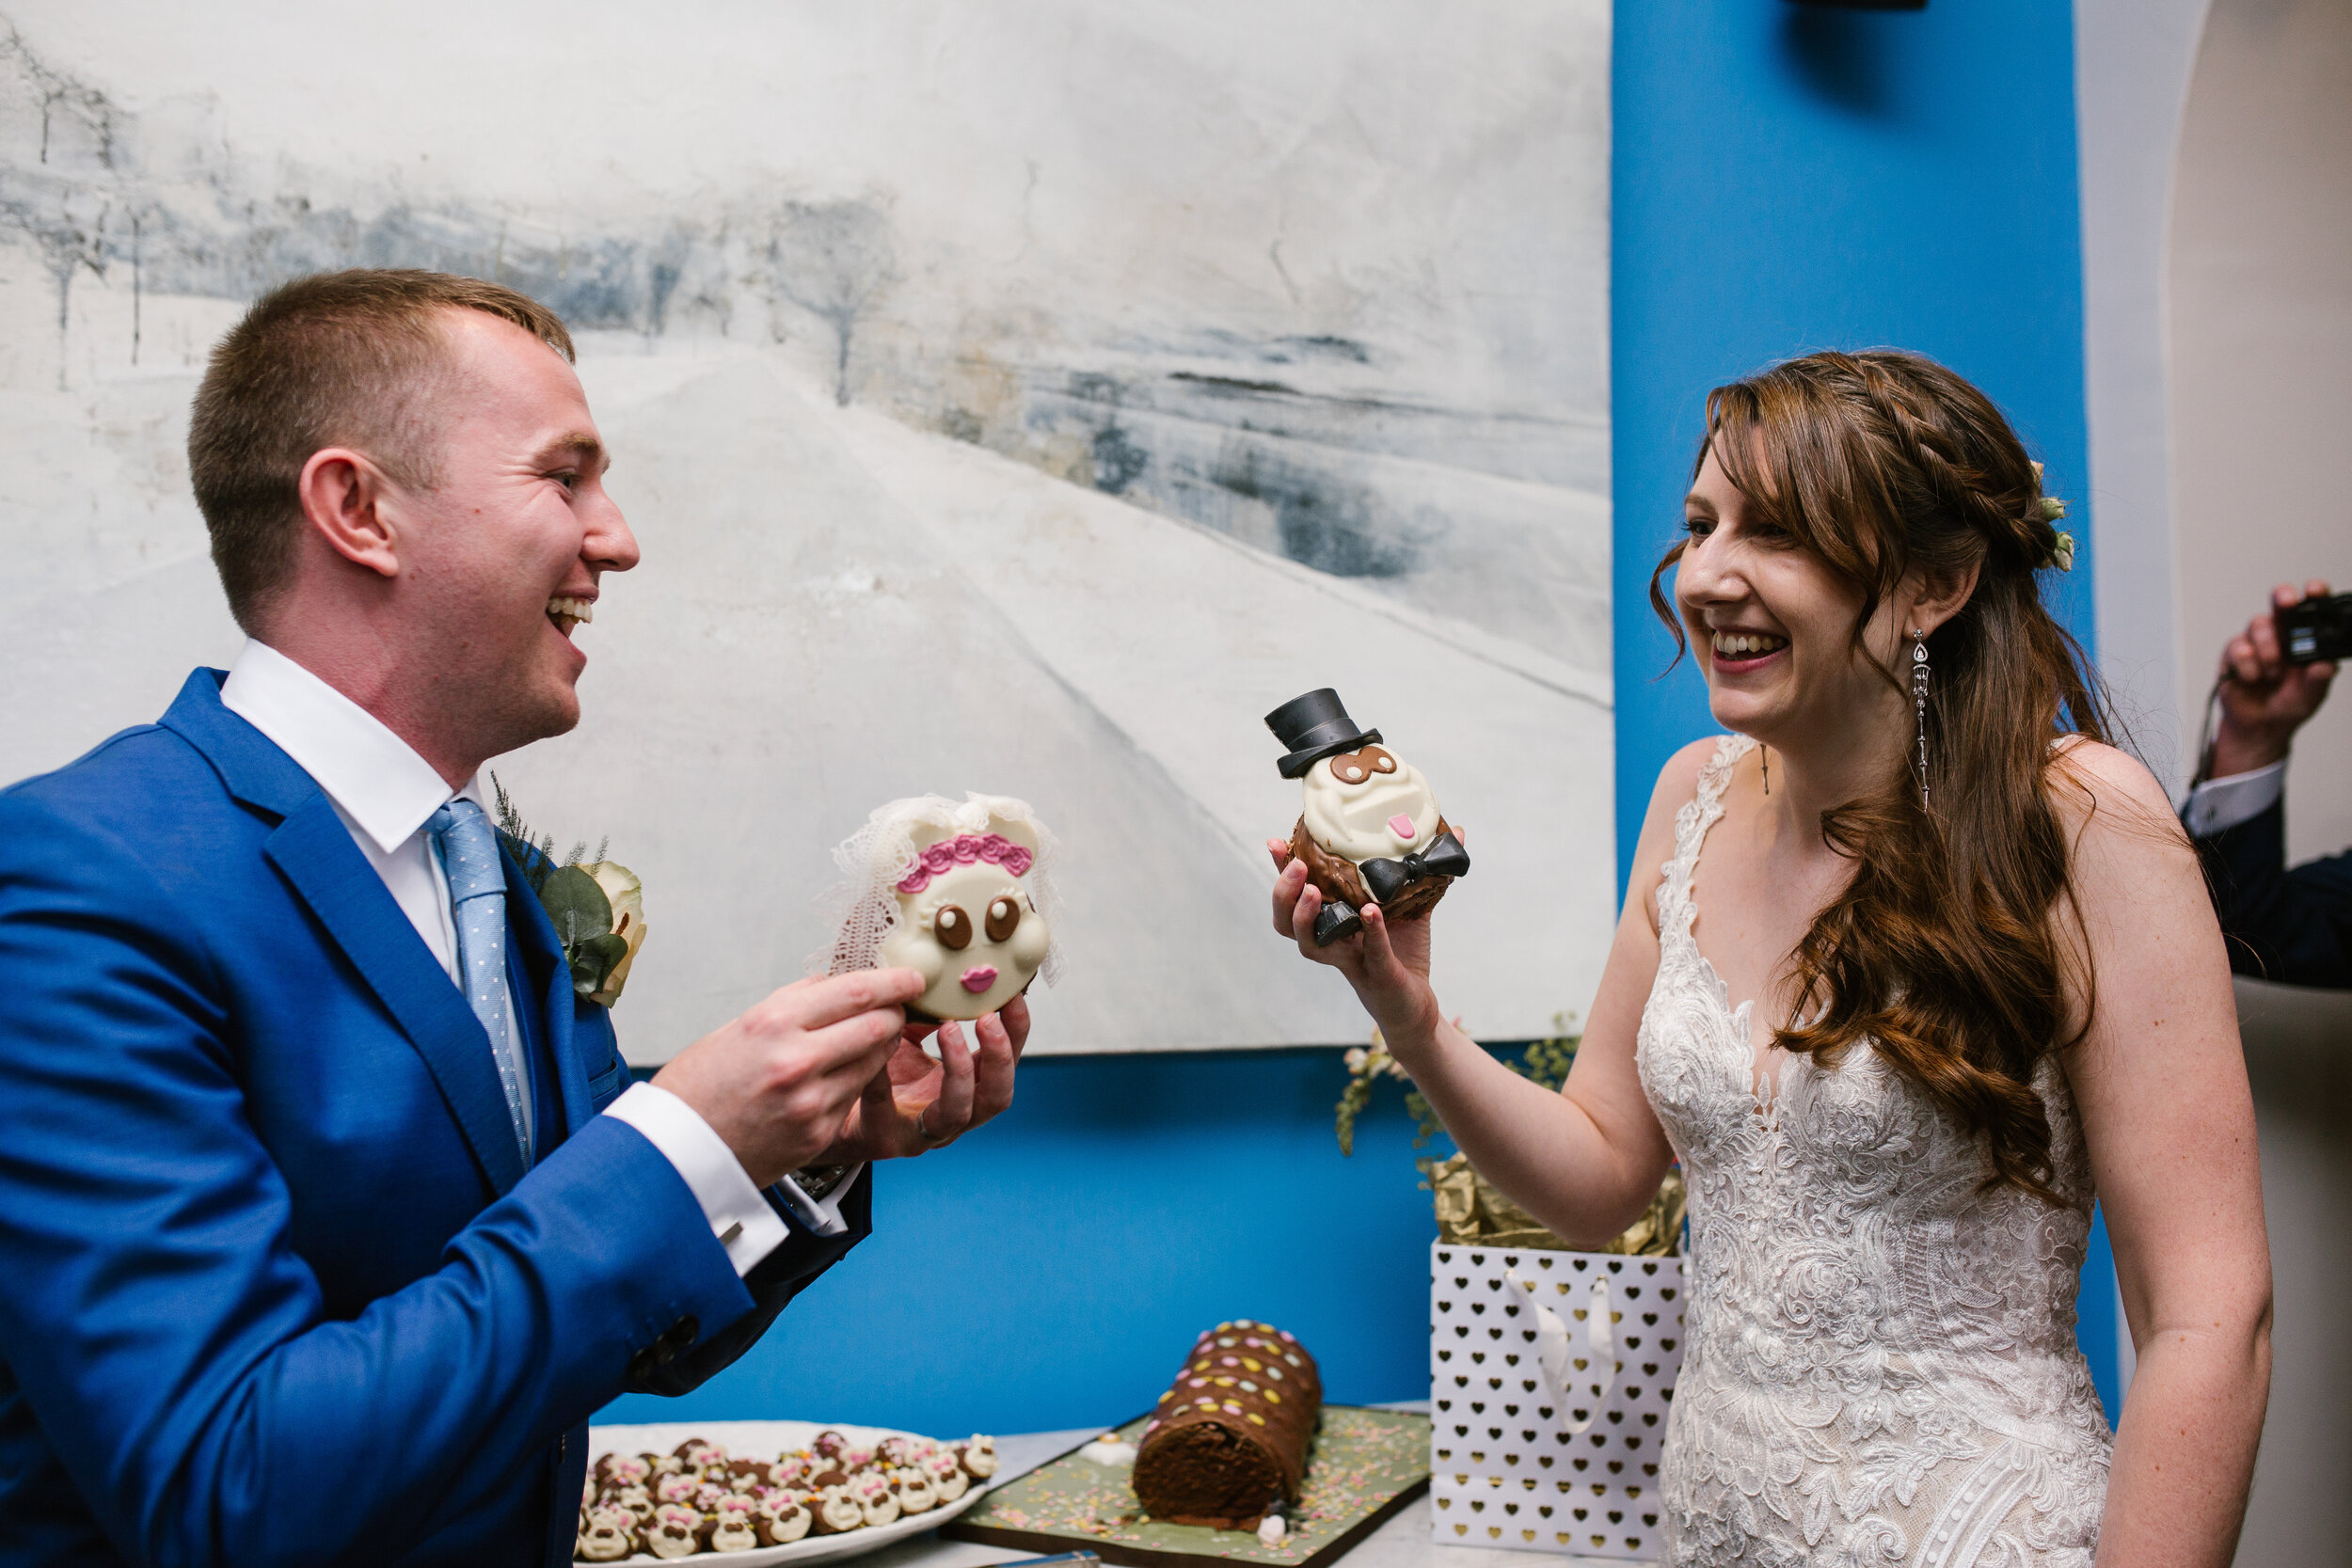 fun photo of the bride and groom after cutting the heads of their wedding caterpillar cake